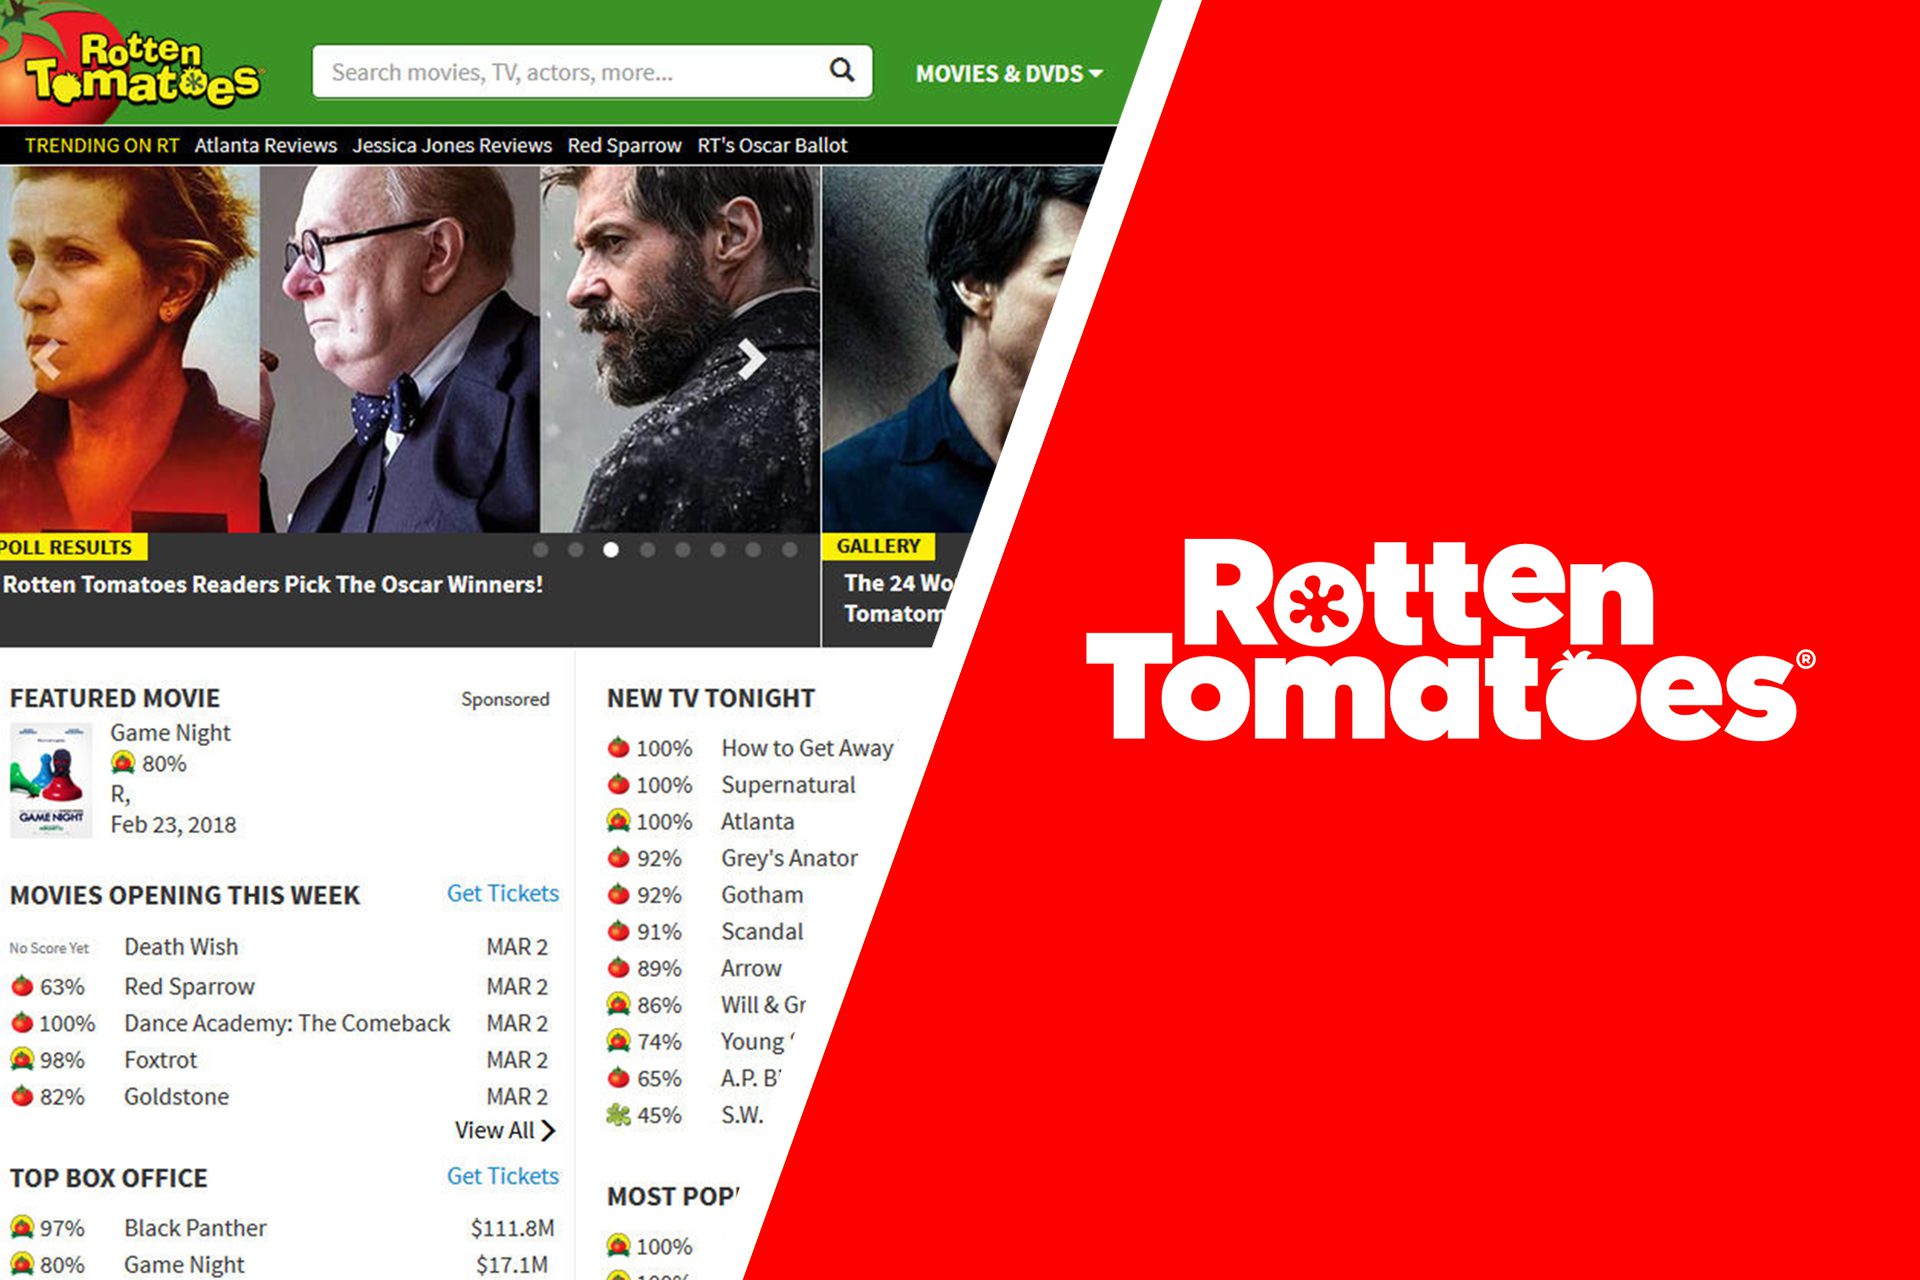 Watch Free Highly Rated on Rotten Tomatoes Movies and TV Shows Online